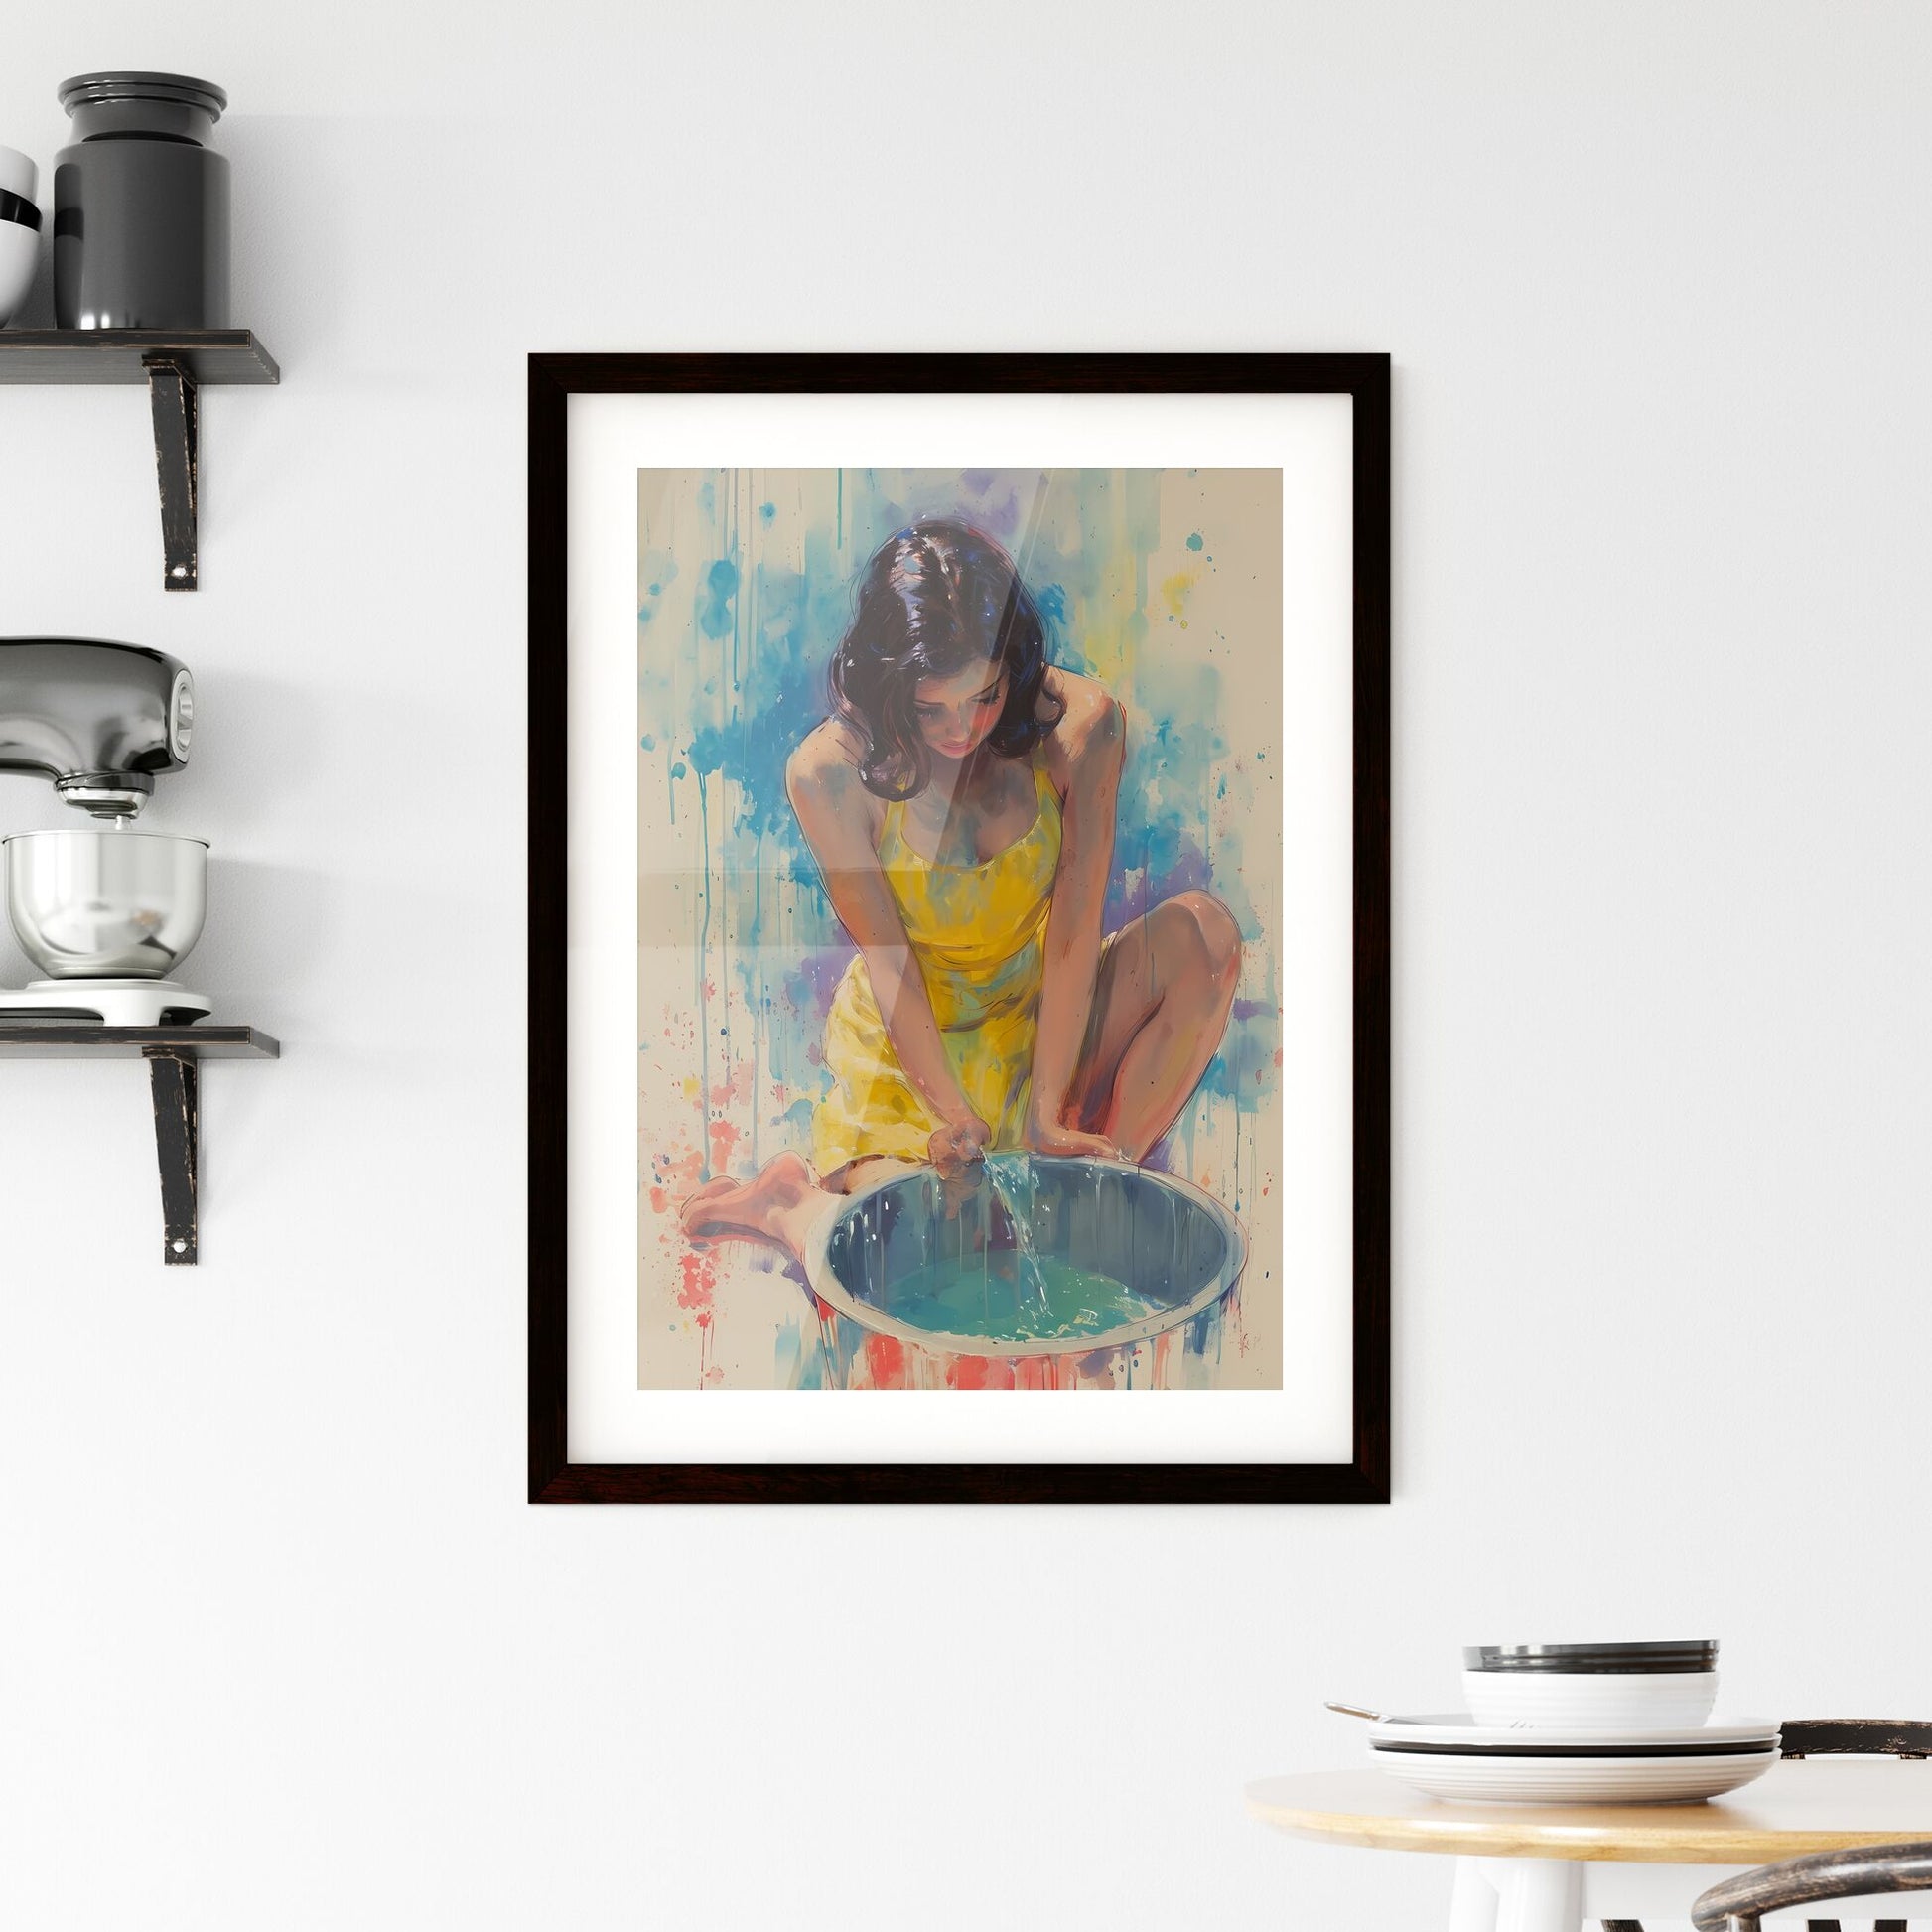 A young woman cleaning a stain off her apron - Art print of a painting of a woman sitting on the floor and pouring water Default Title